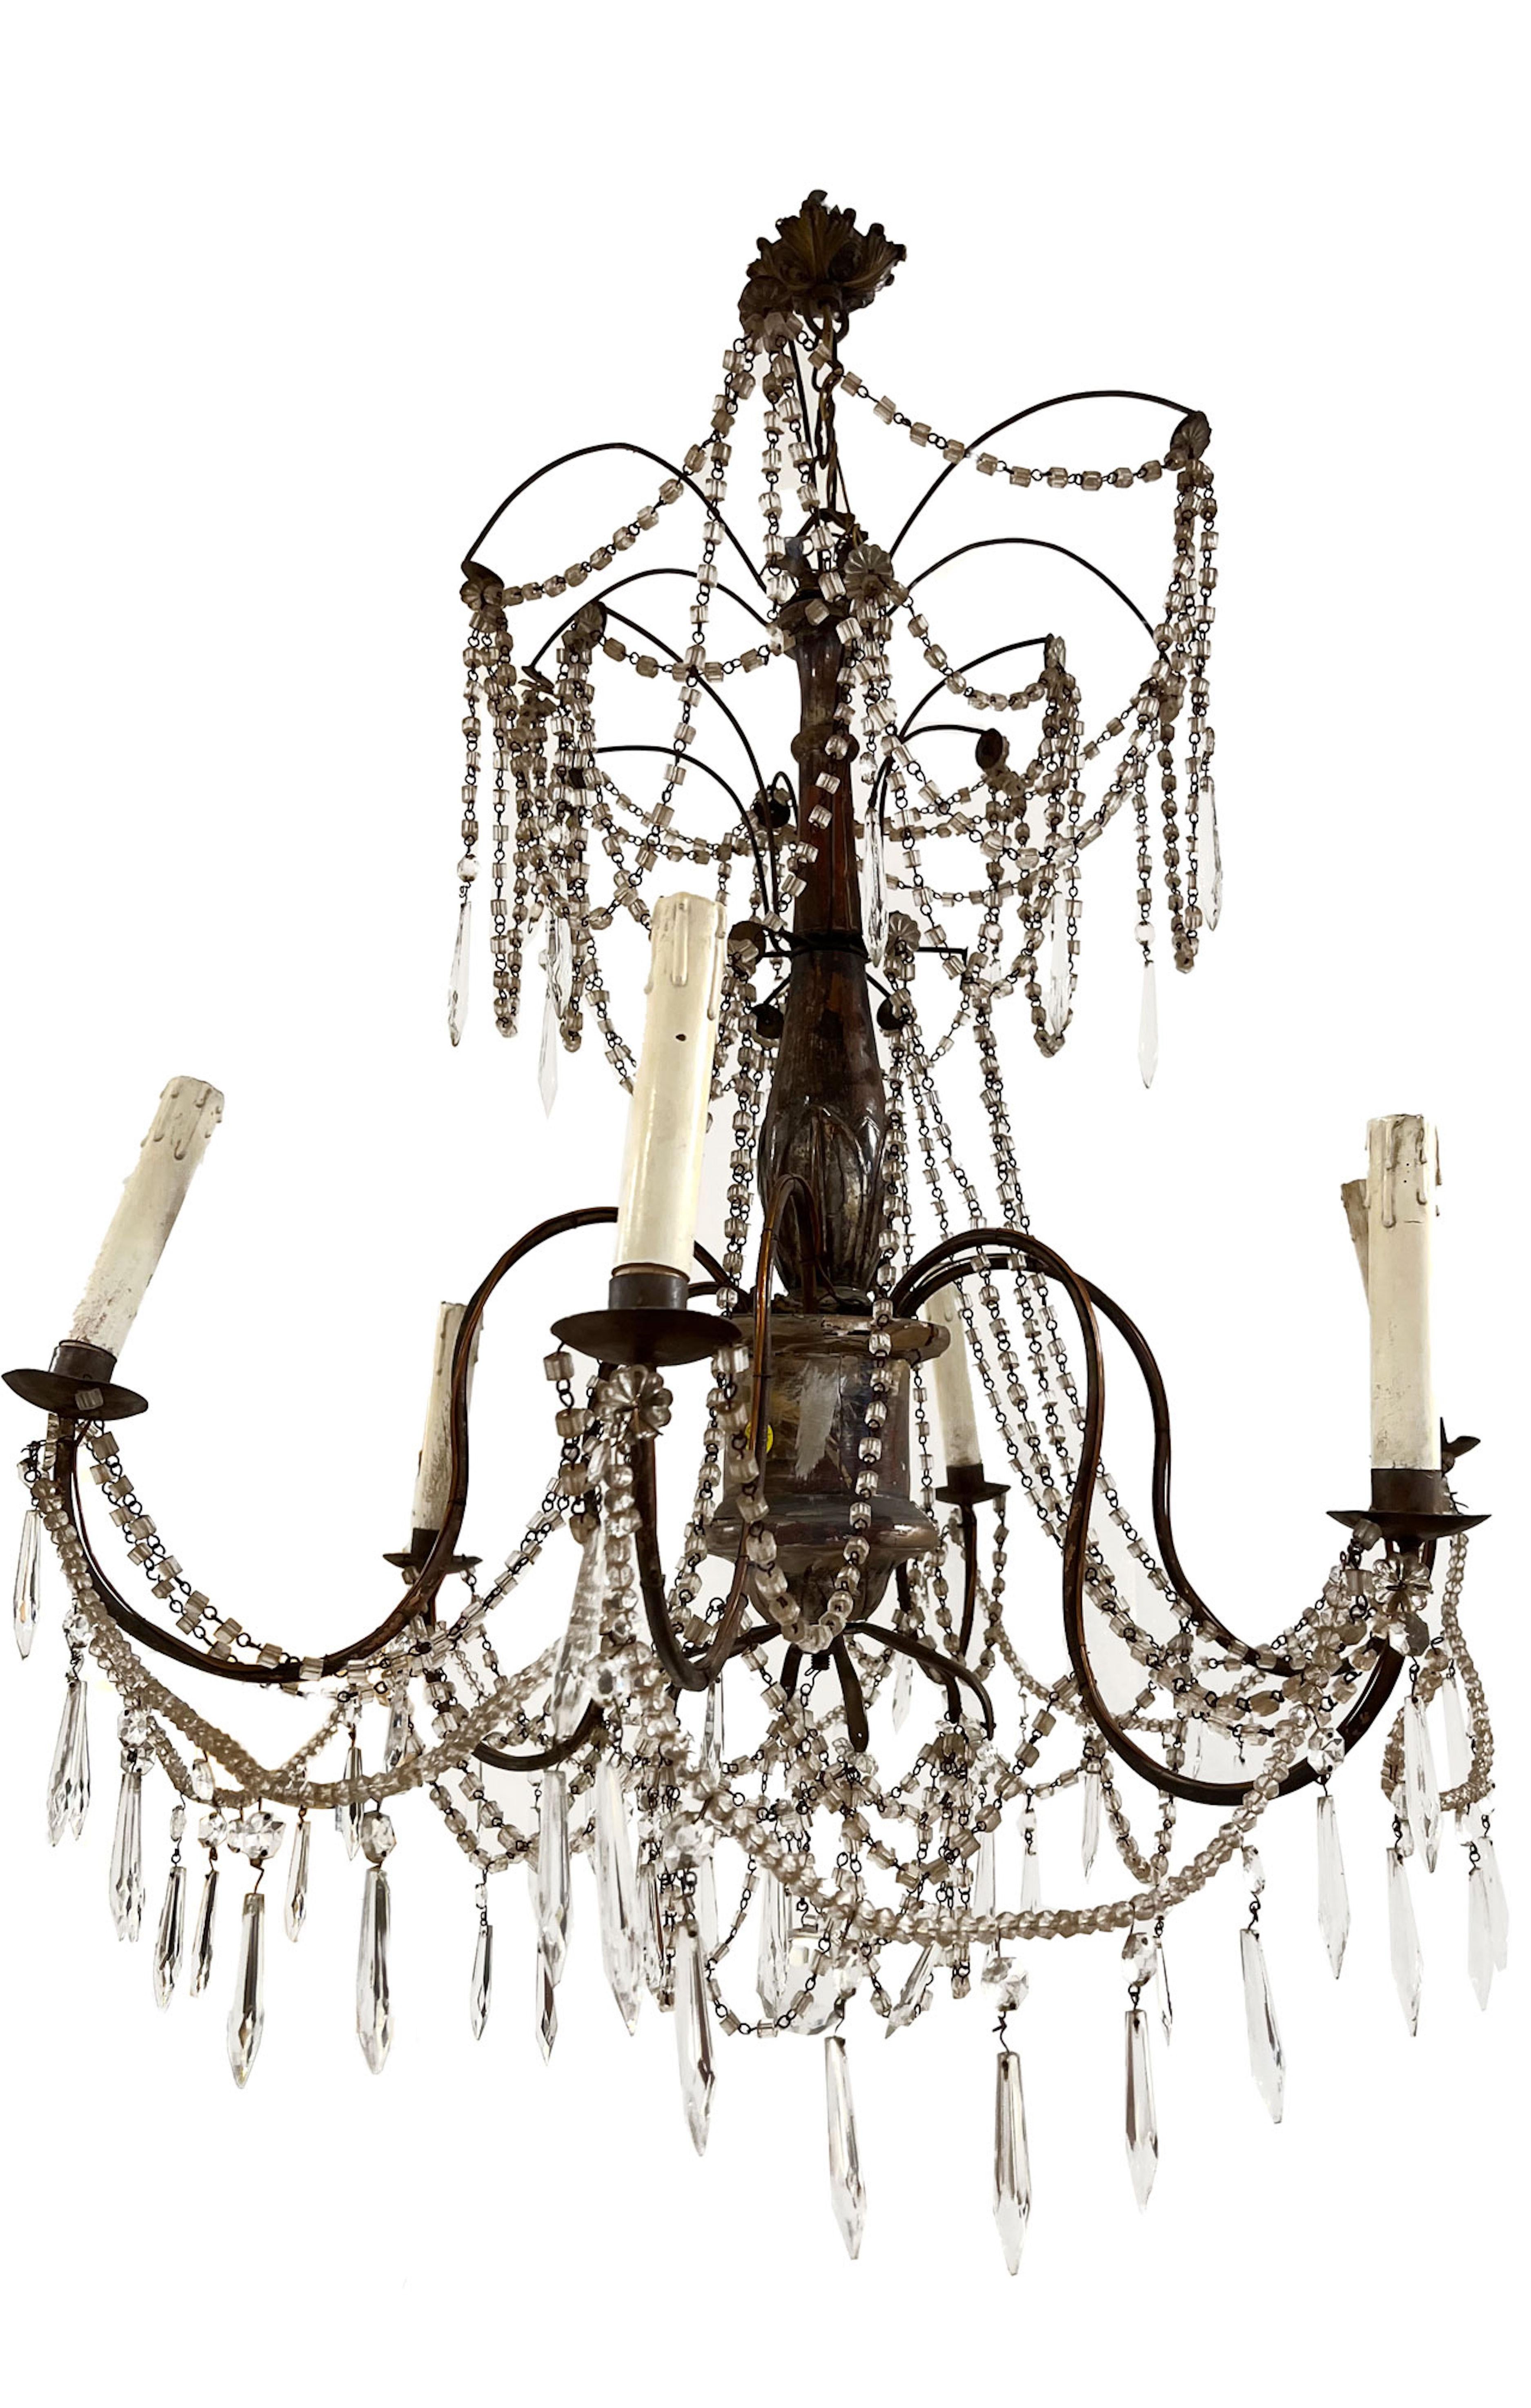 The aged patina of the silver leaf makes this pair of chandeliers a standout. Dripping crystal, elegance and sophistication are on display in the room that is fortunate enough to have them.